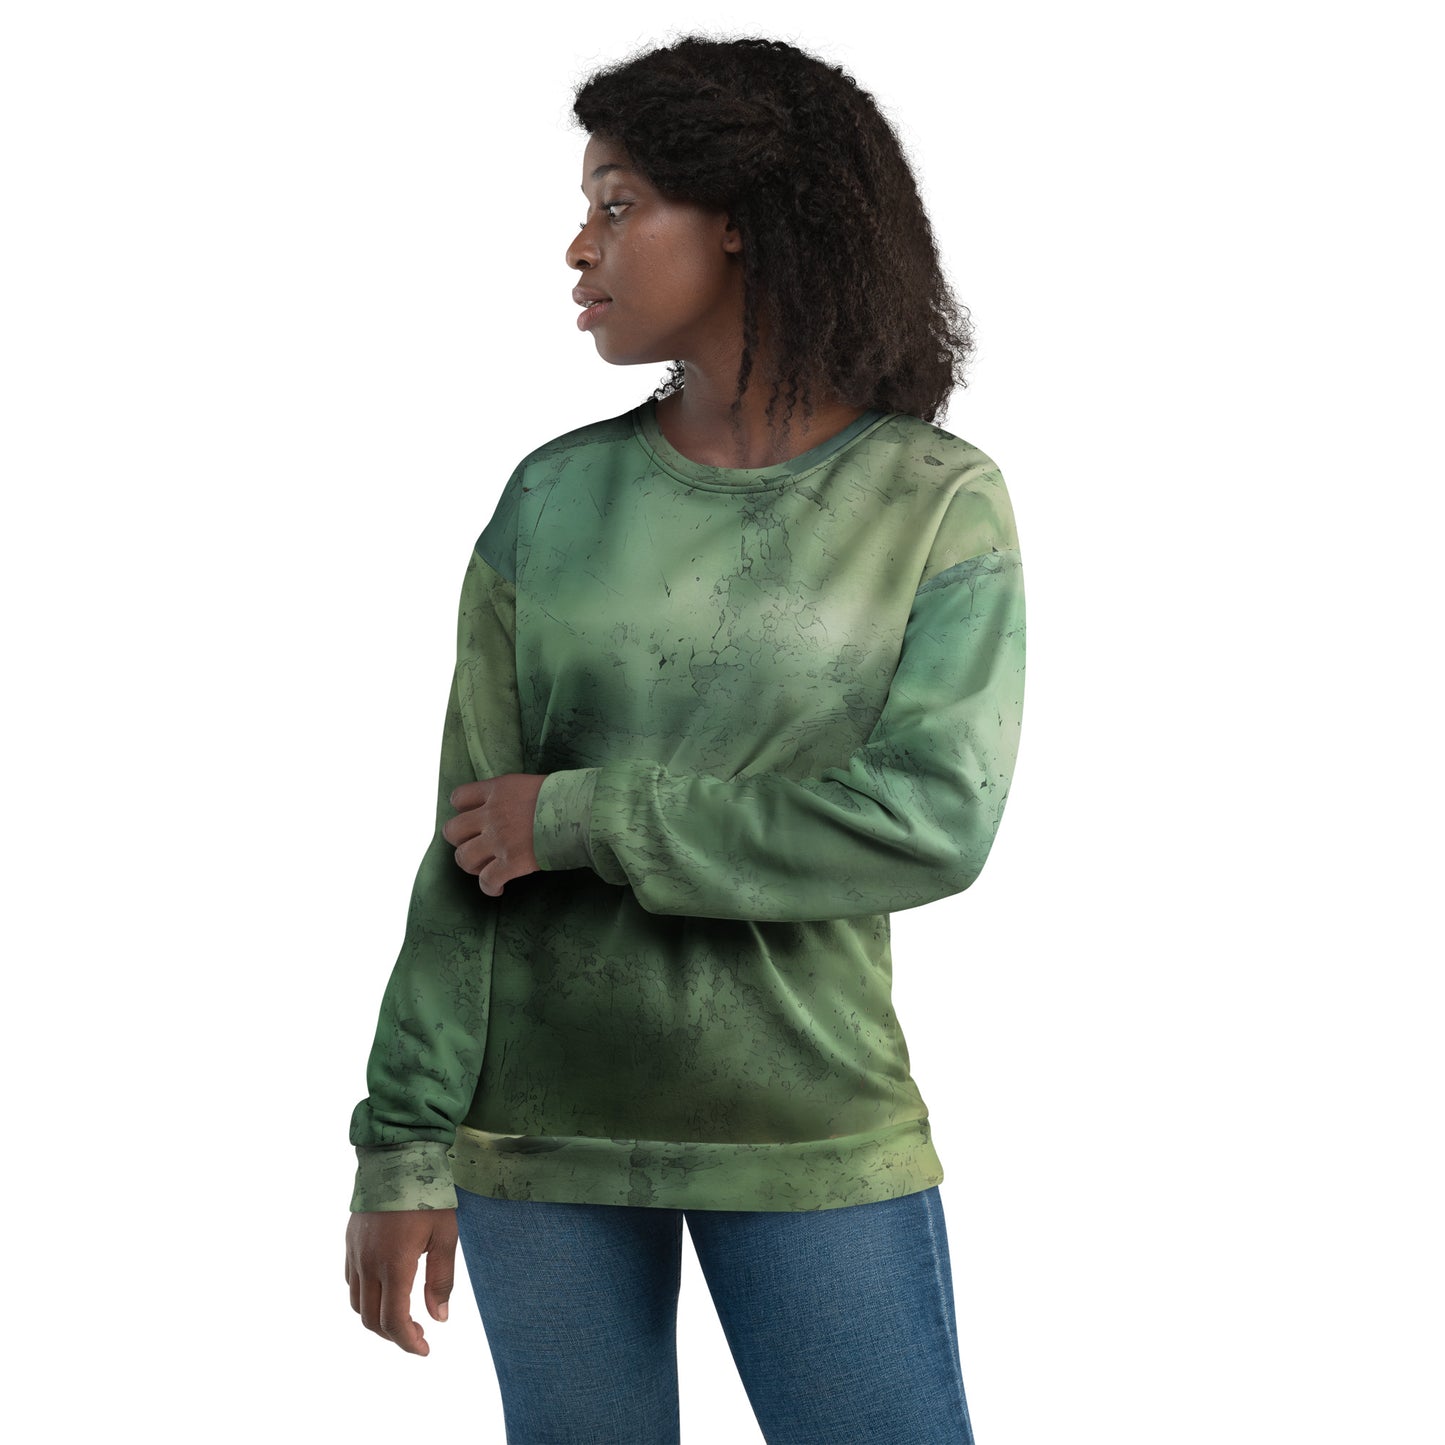 Sustainable Style: Unisex Eco-Friendly Green Sweater for All